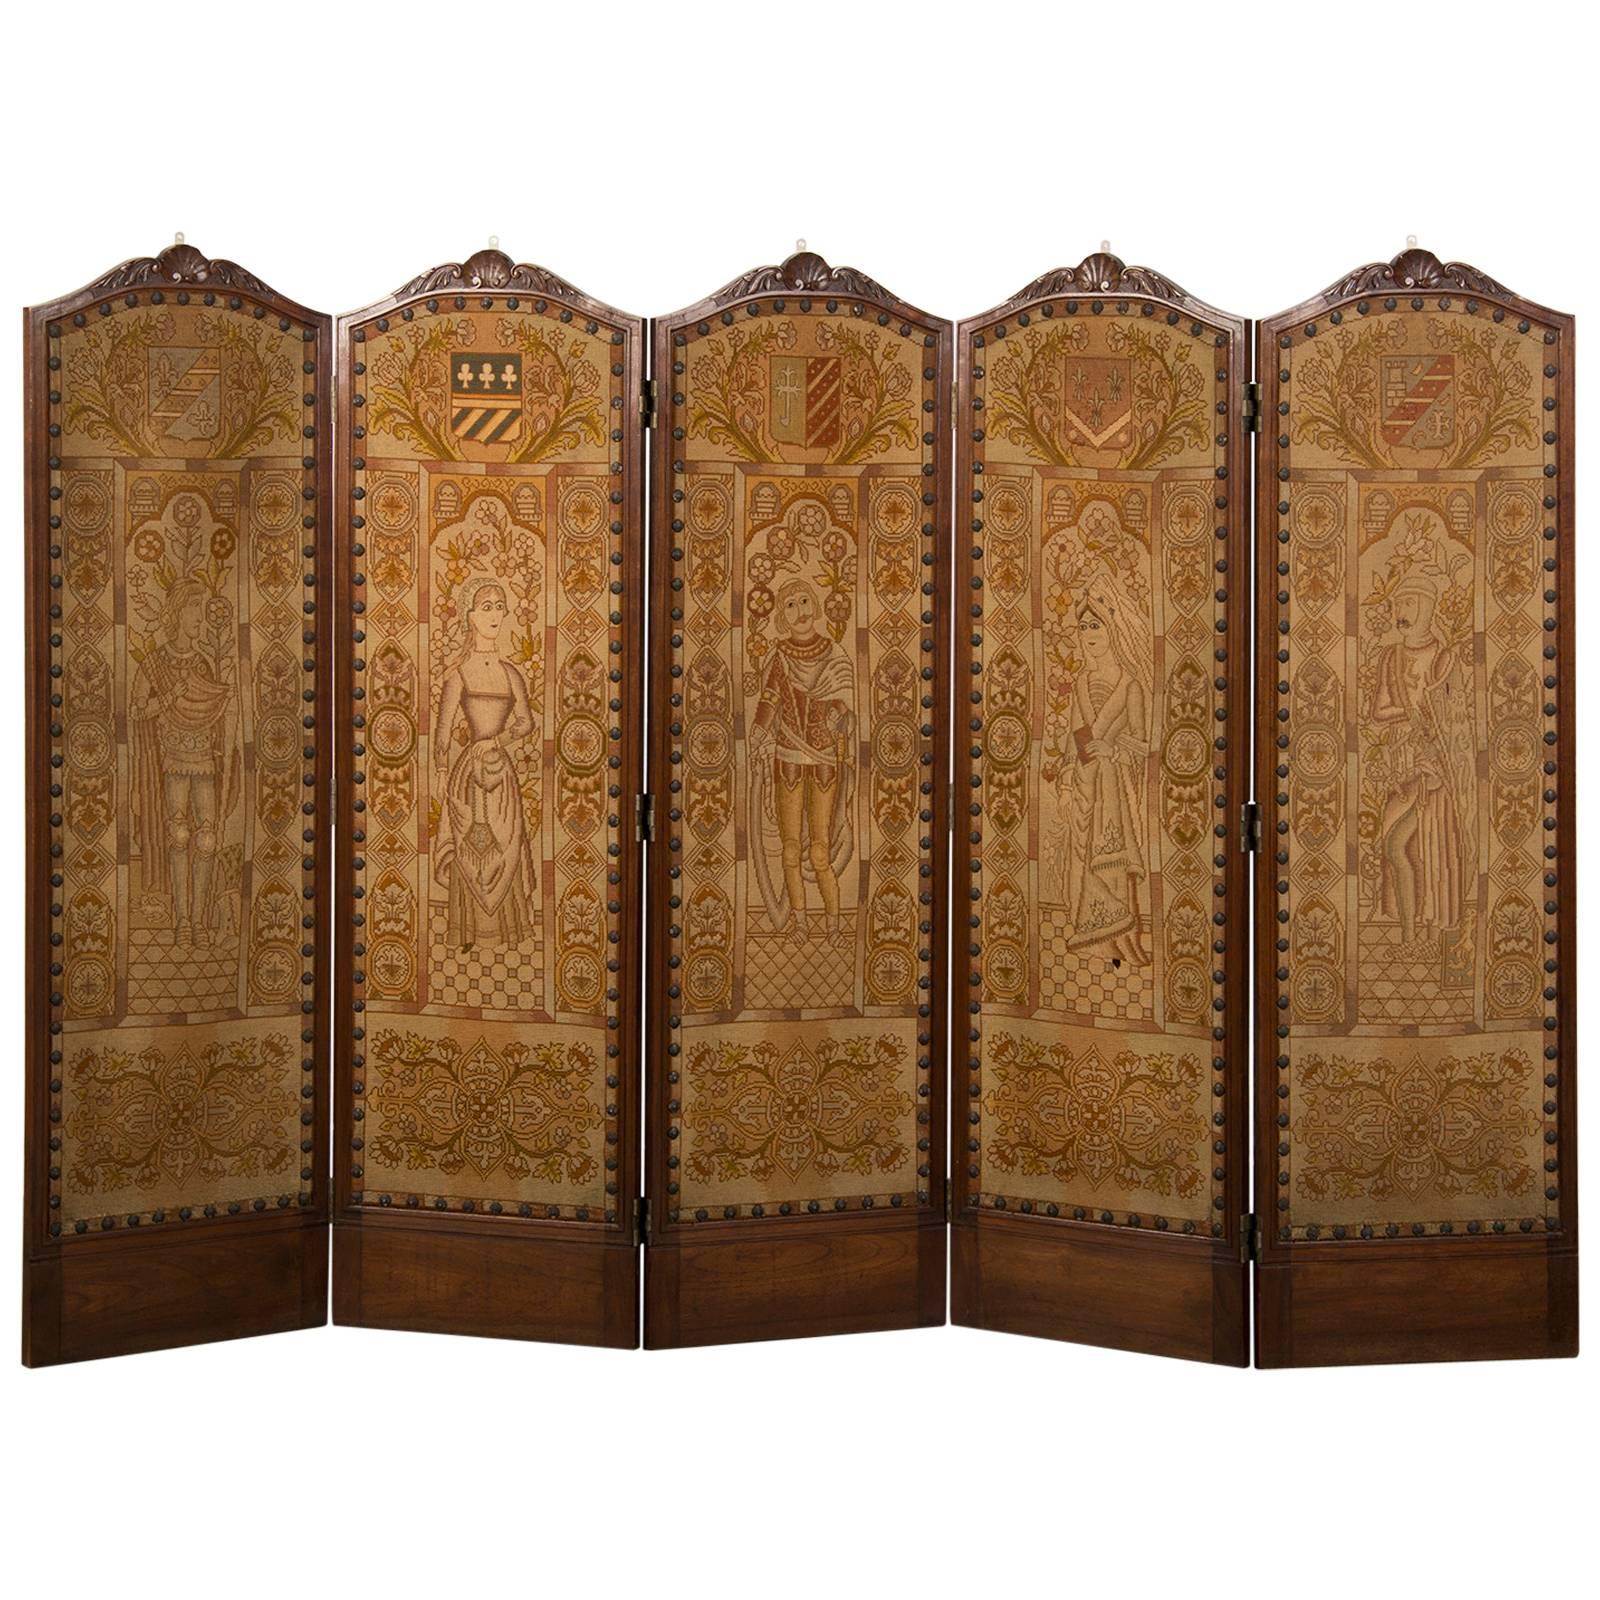 Régence Style Antique French Five-Panel Walnut Needlepoint Screen, circa 1875 For Sale